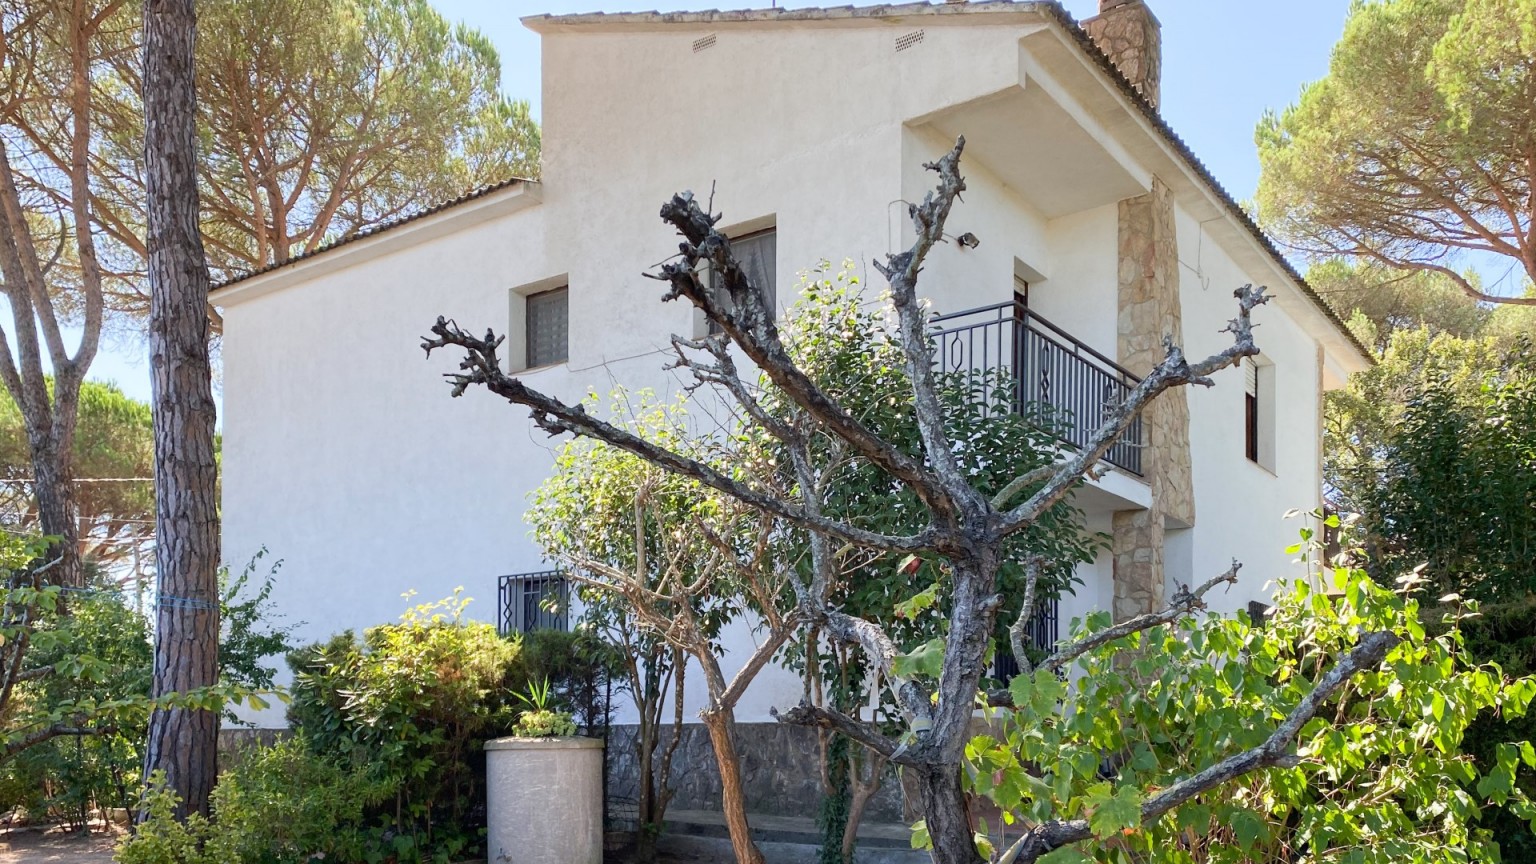 House for sale with pool located 20 minutes from Girona, with an area of ​​160 m2